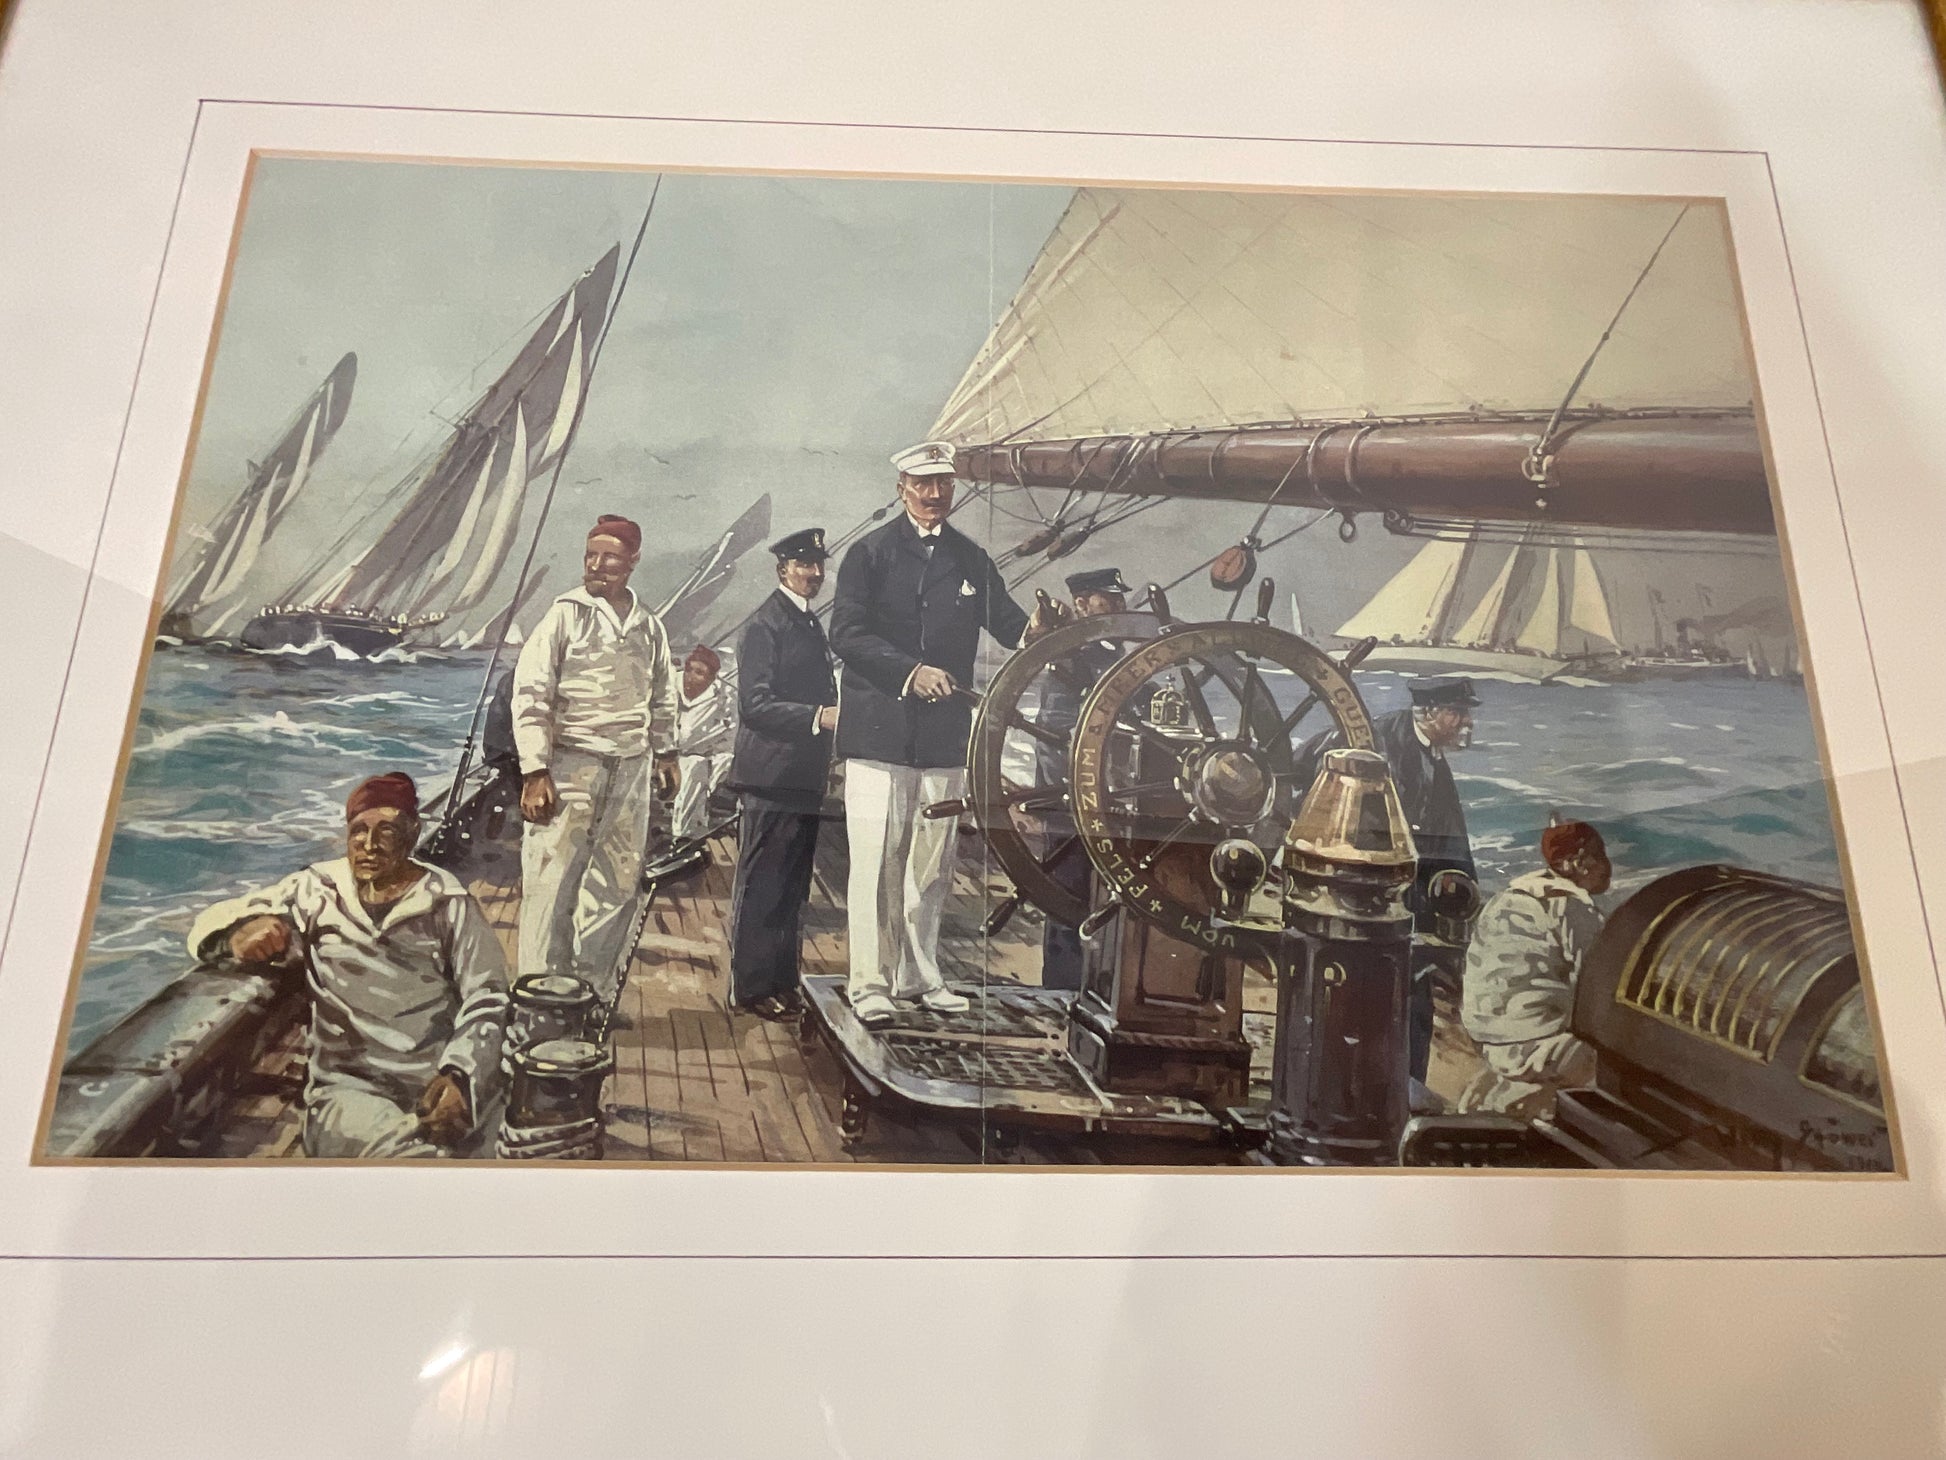 Yachting Print showing Yacht Meteor - Lannan Gallery